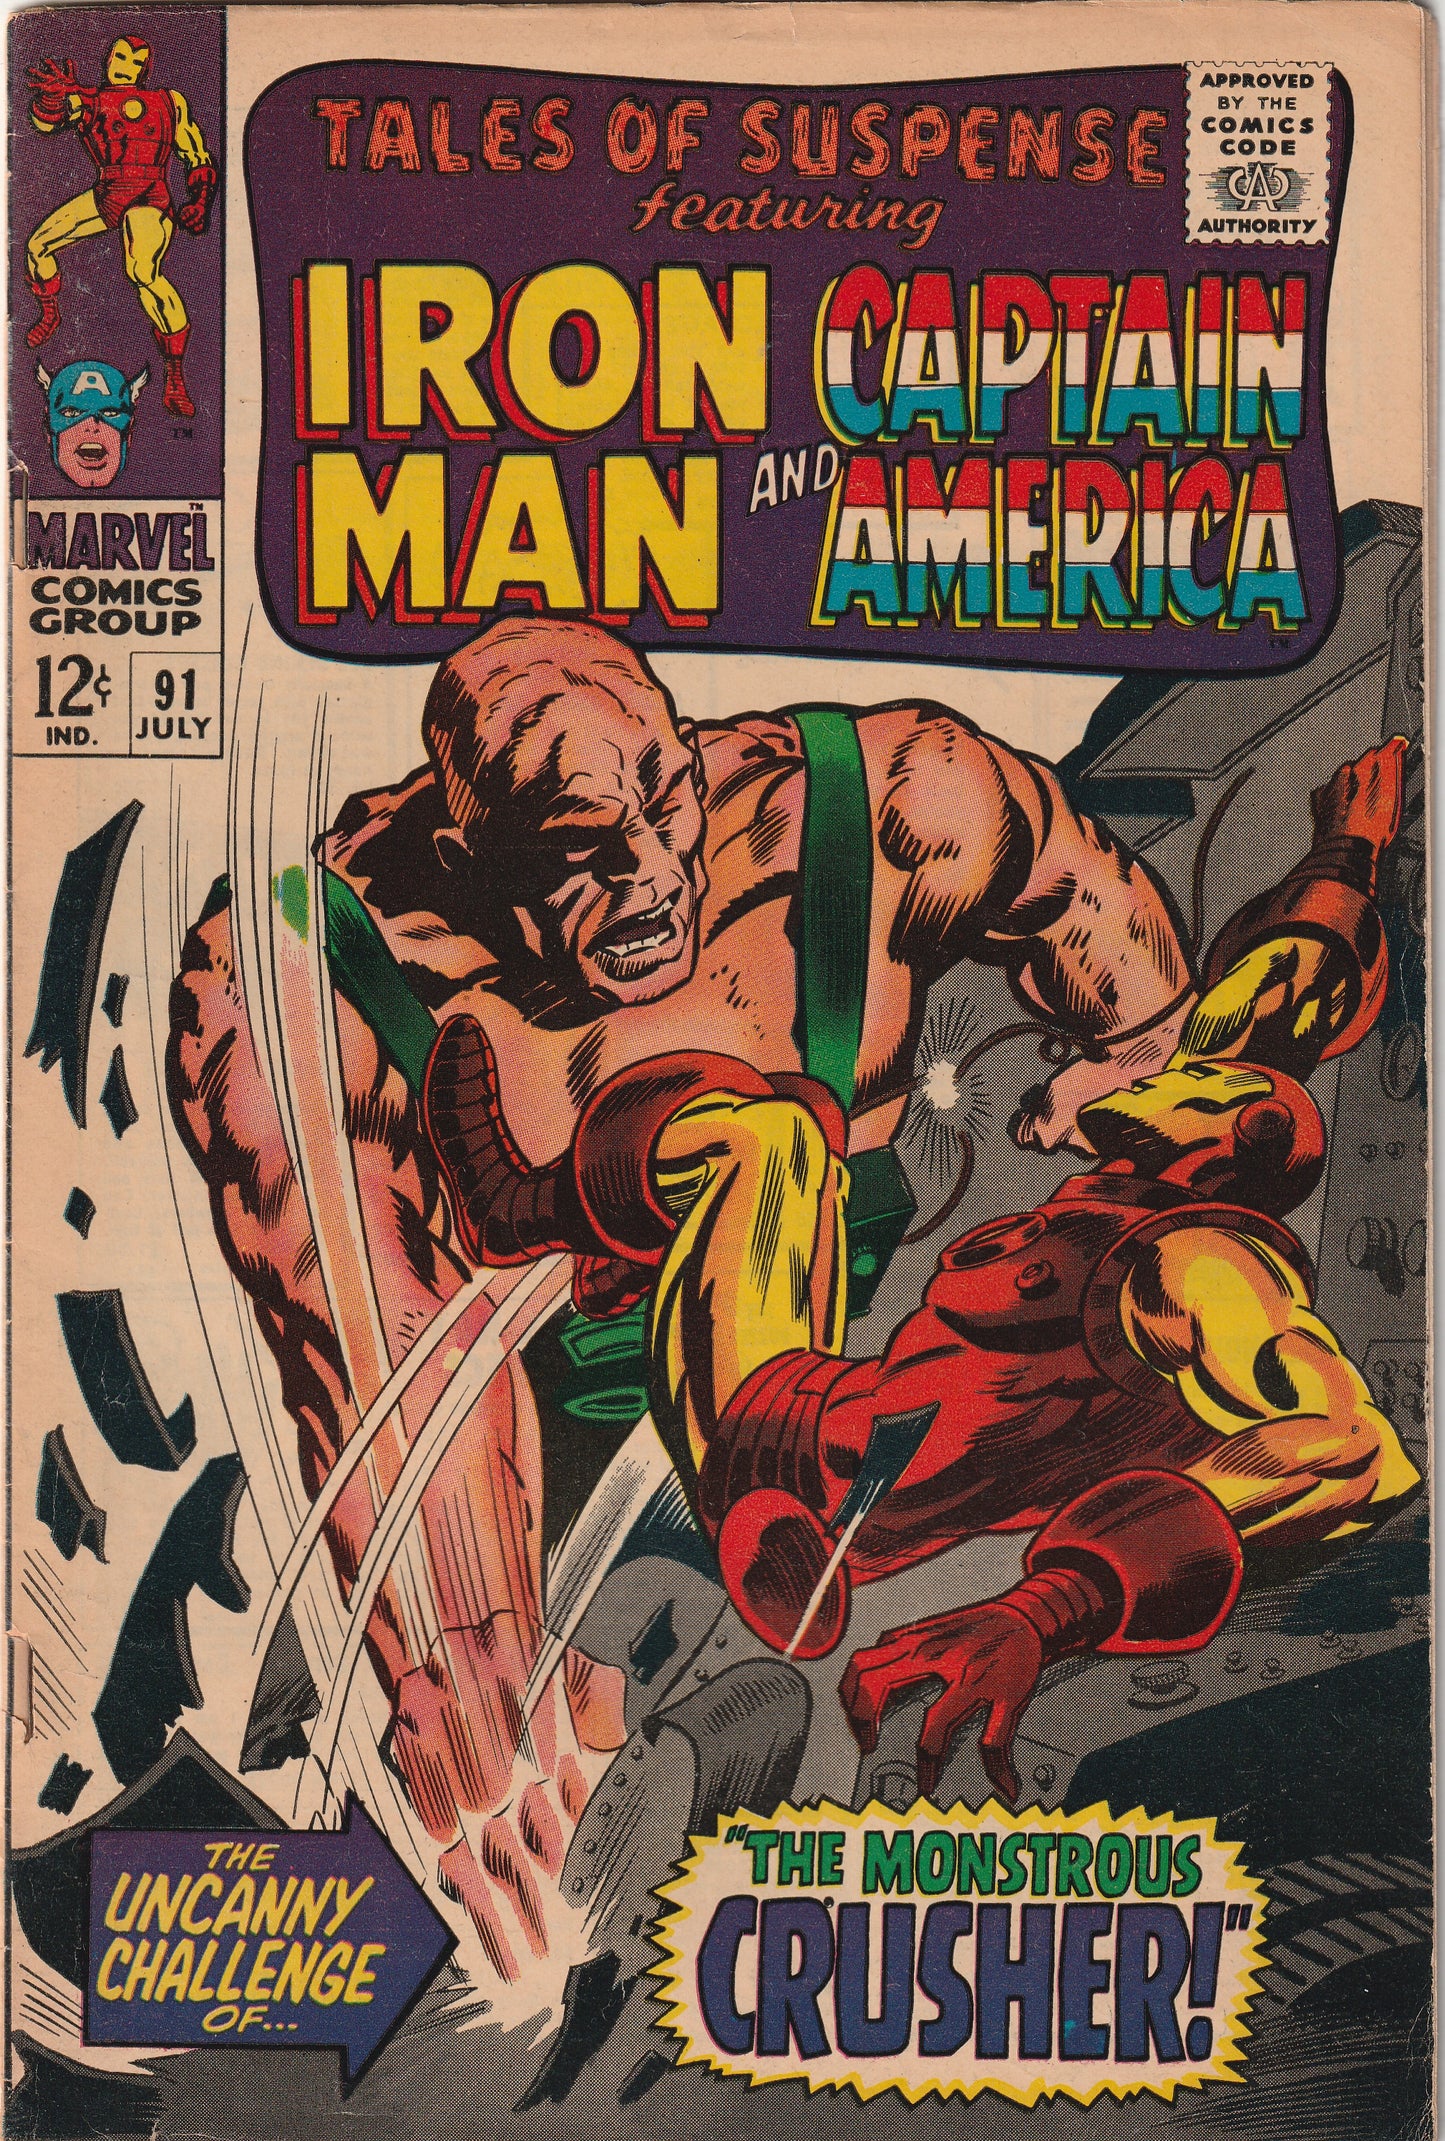 Tales of Suspense #91 (1967) - Featuring Captain America and Iron Man